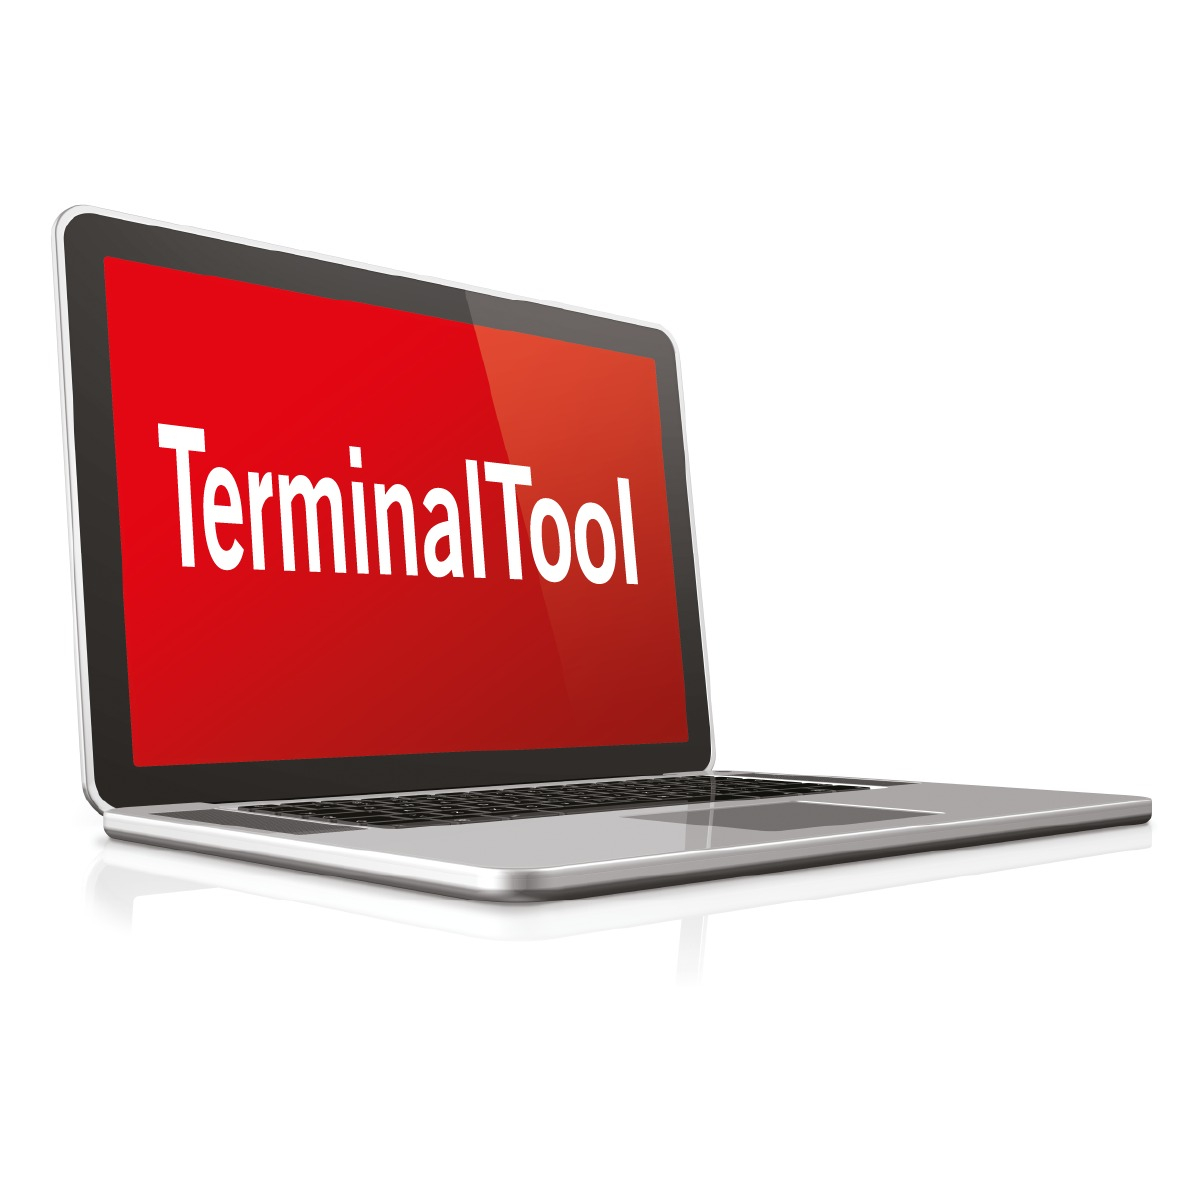 Laptop displaying a red screen with the text 'TerminalTool'